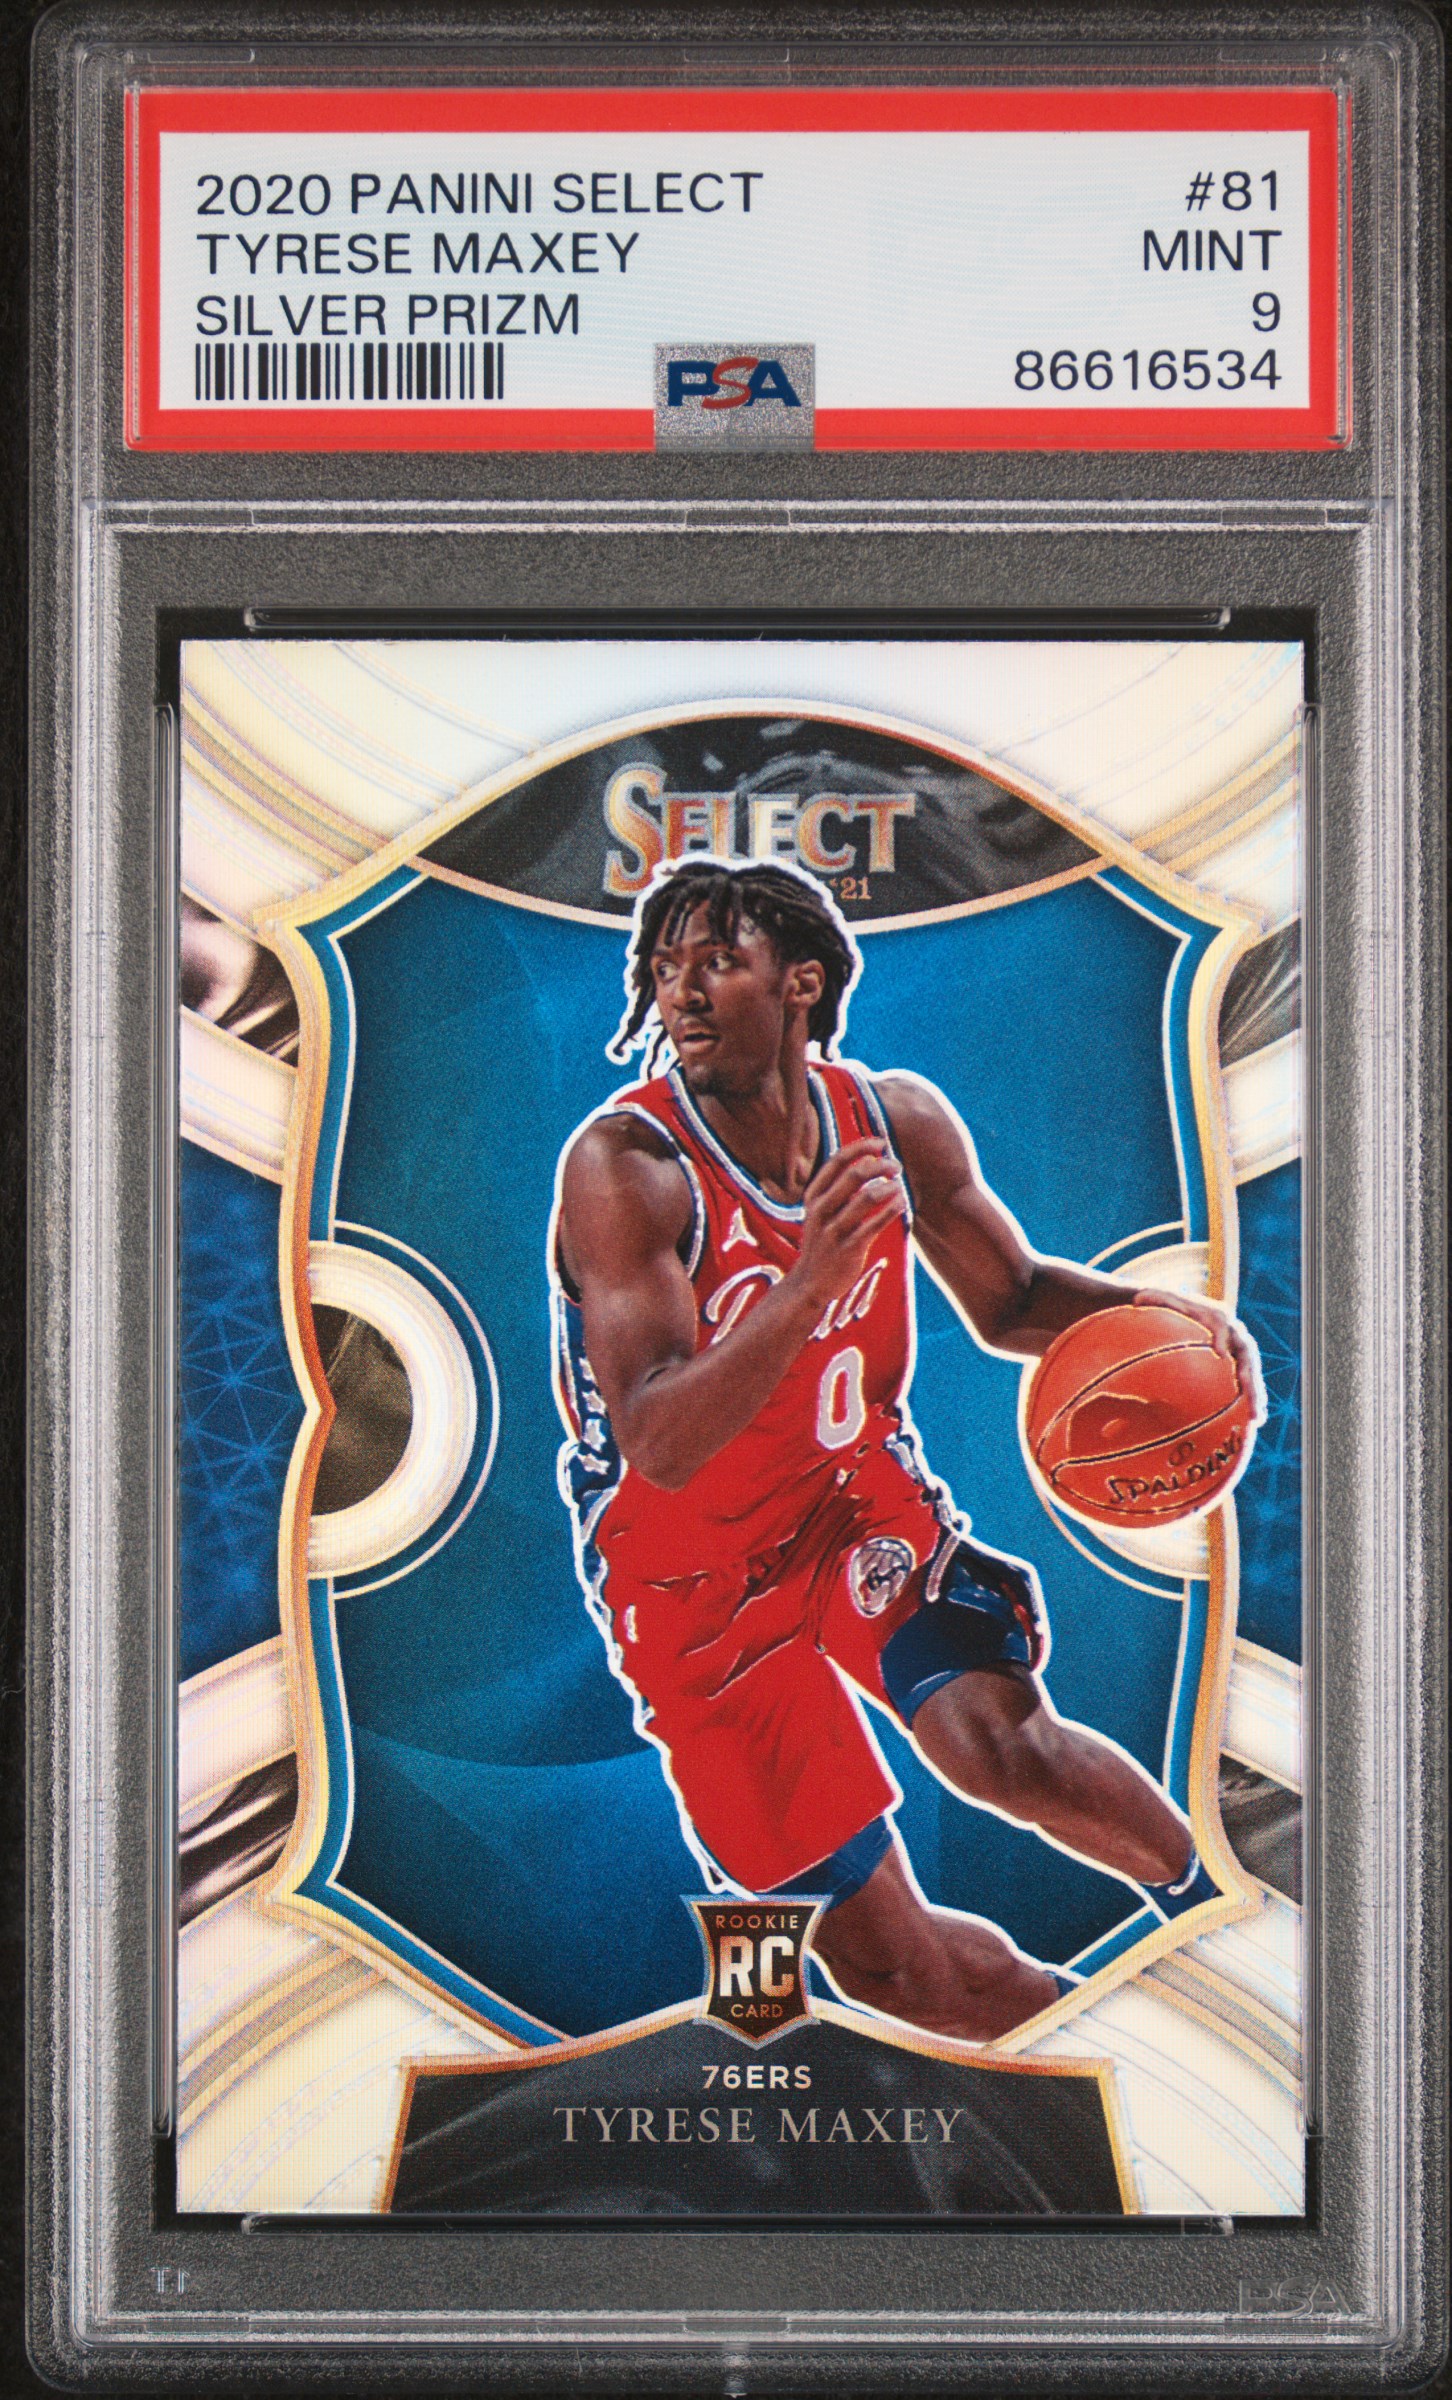 2020-21 Panini Select Silver Prizm #81 Tyrese Maxey Rookie Card – PSA MINT 9